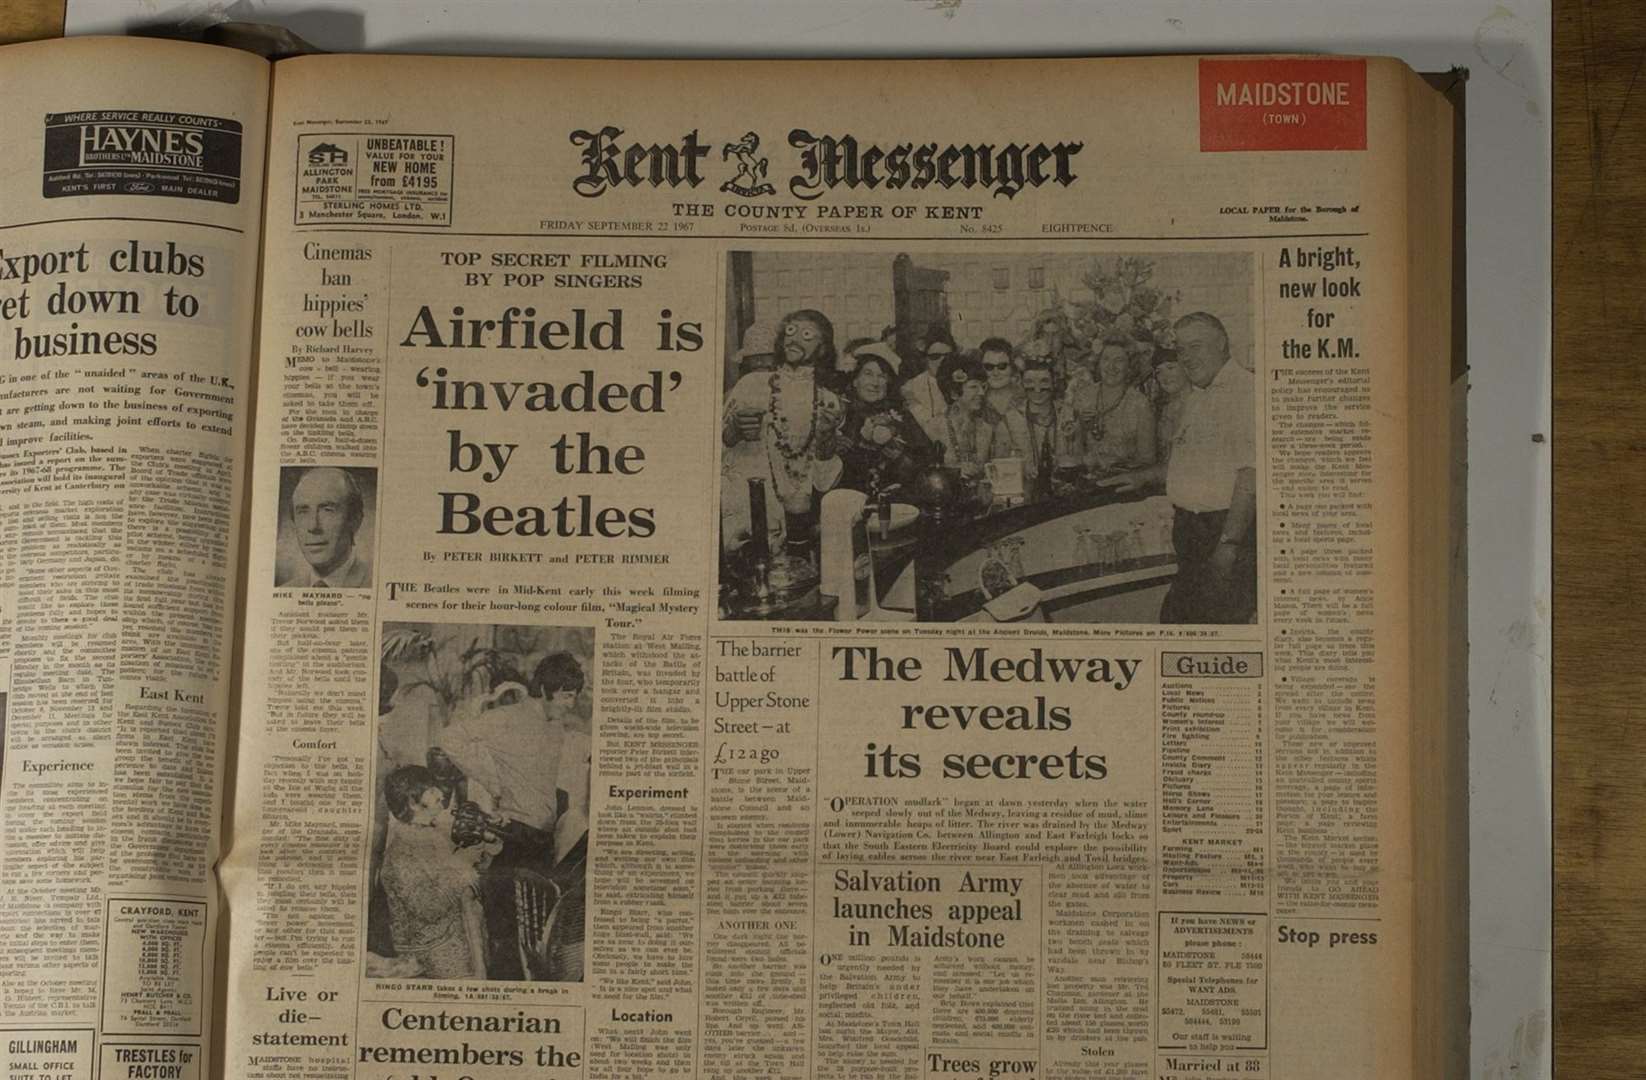 The Kent Messenger's front page from September 22, 1967